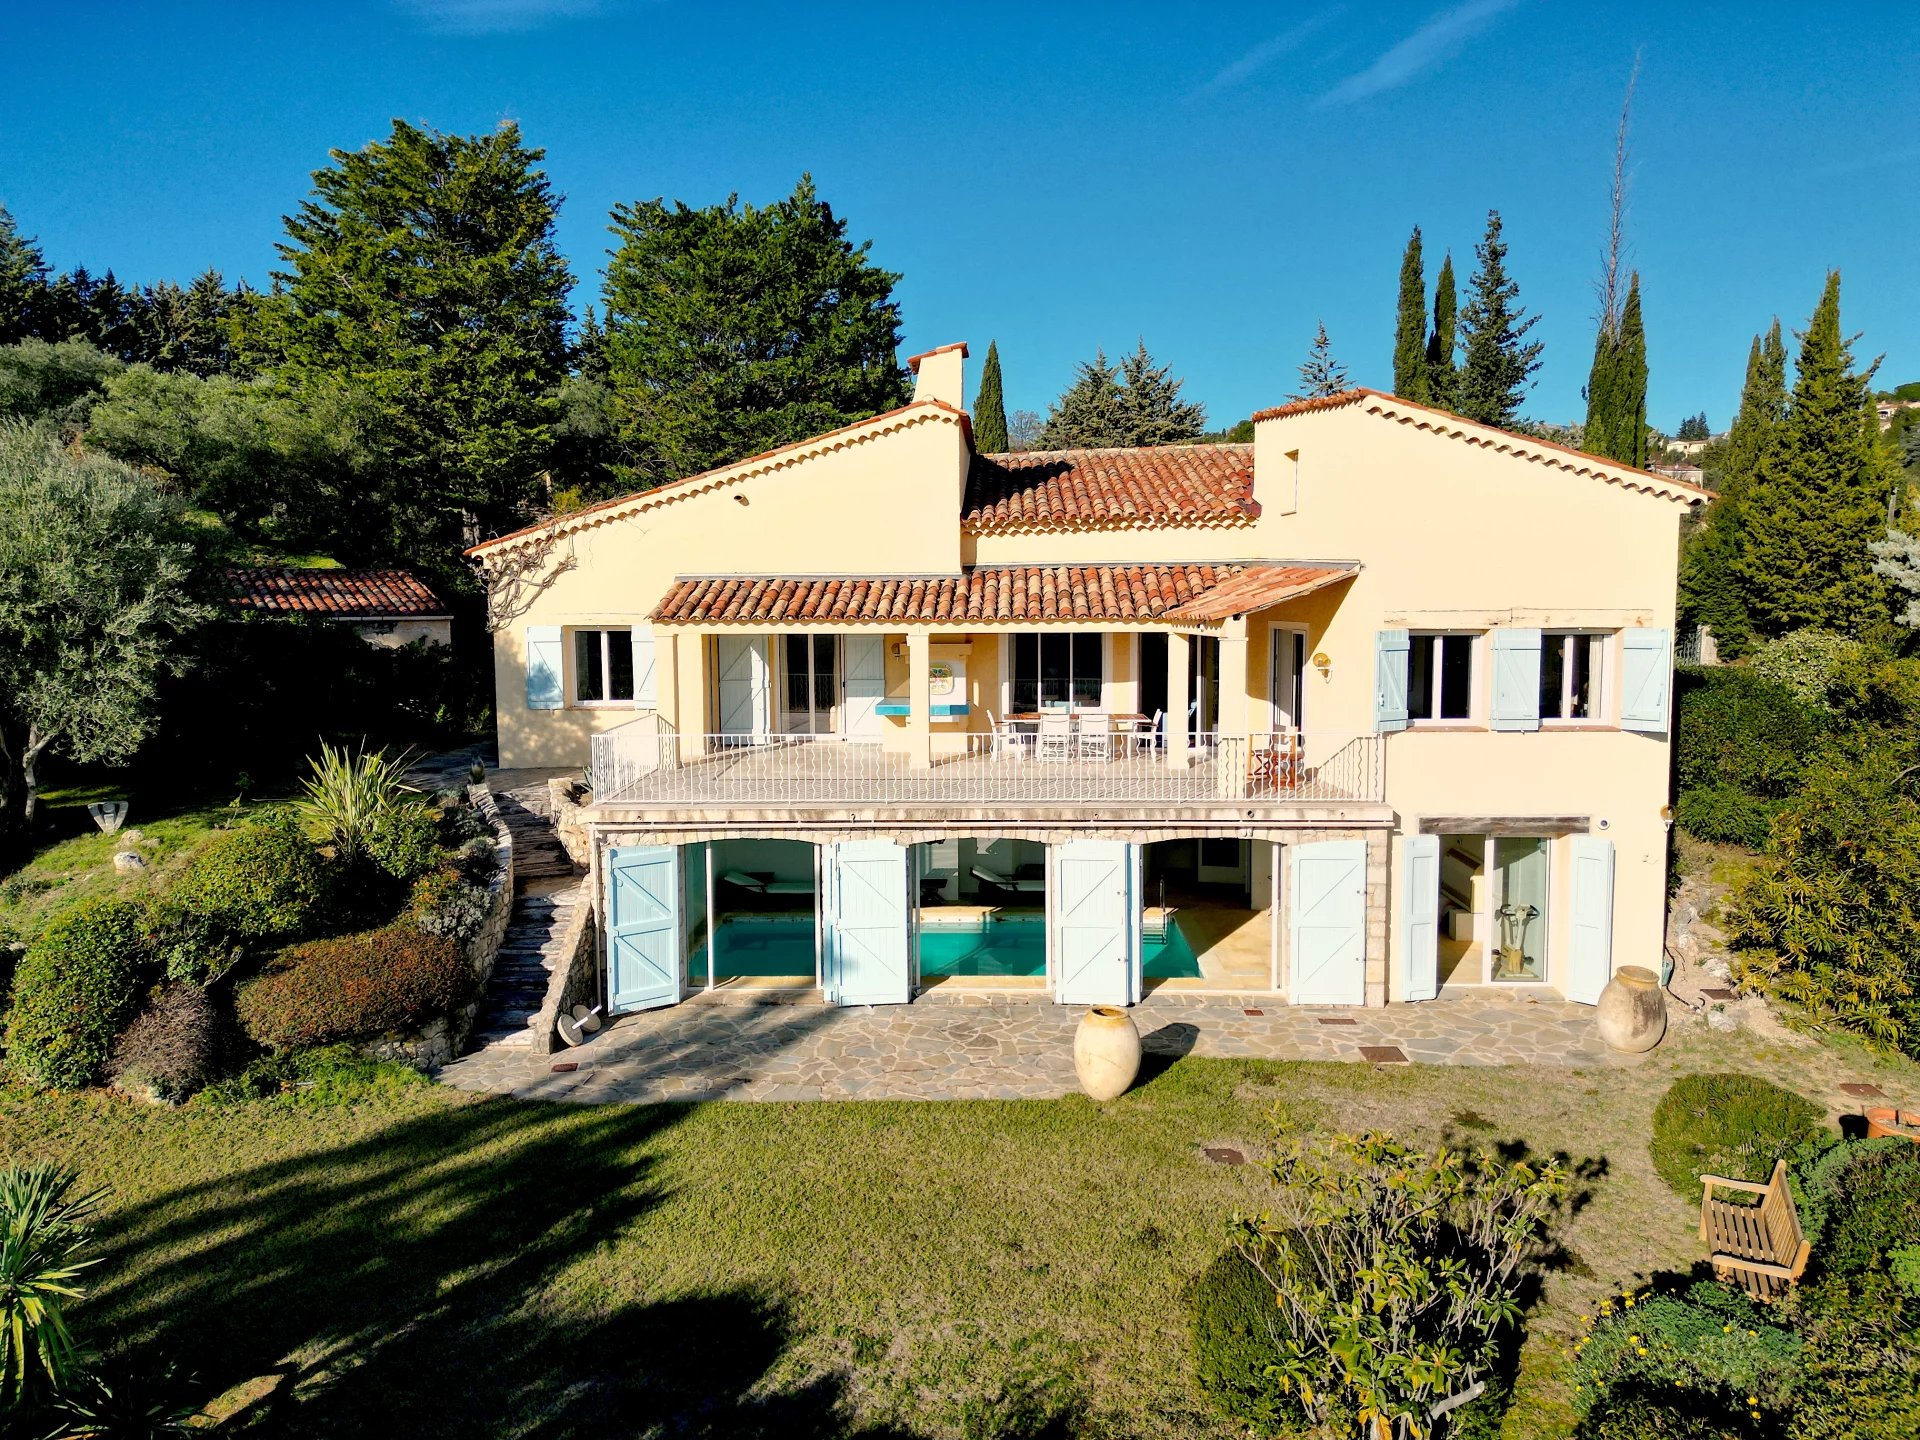 Great 6 bedroom villa with breathtaking views - Tourrettes